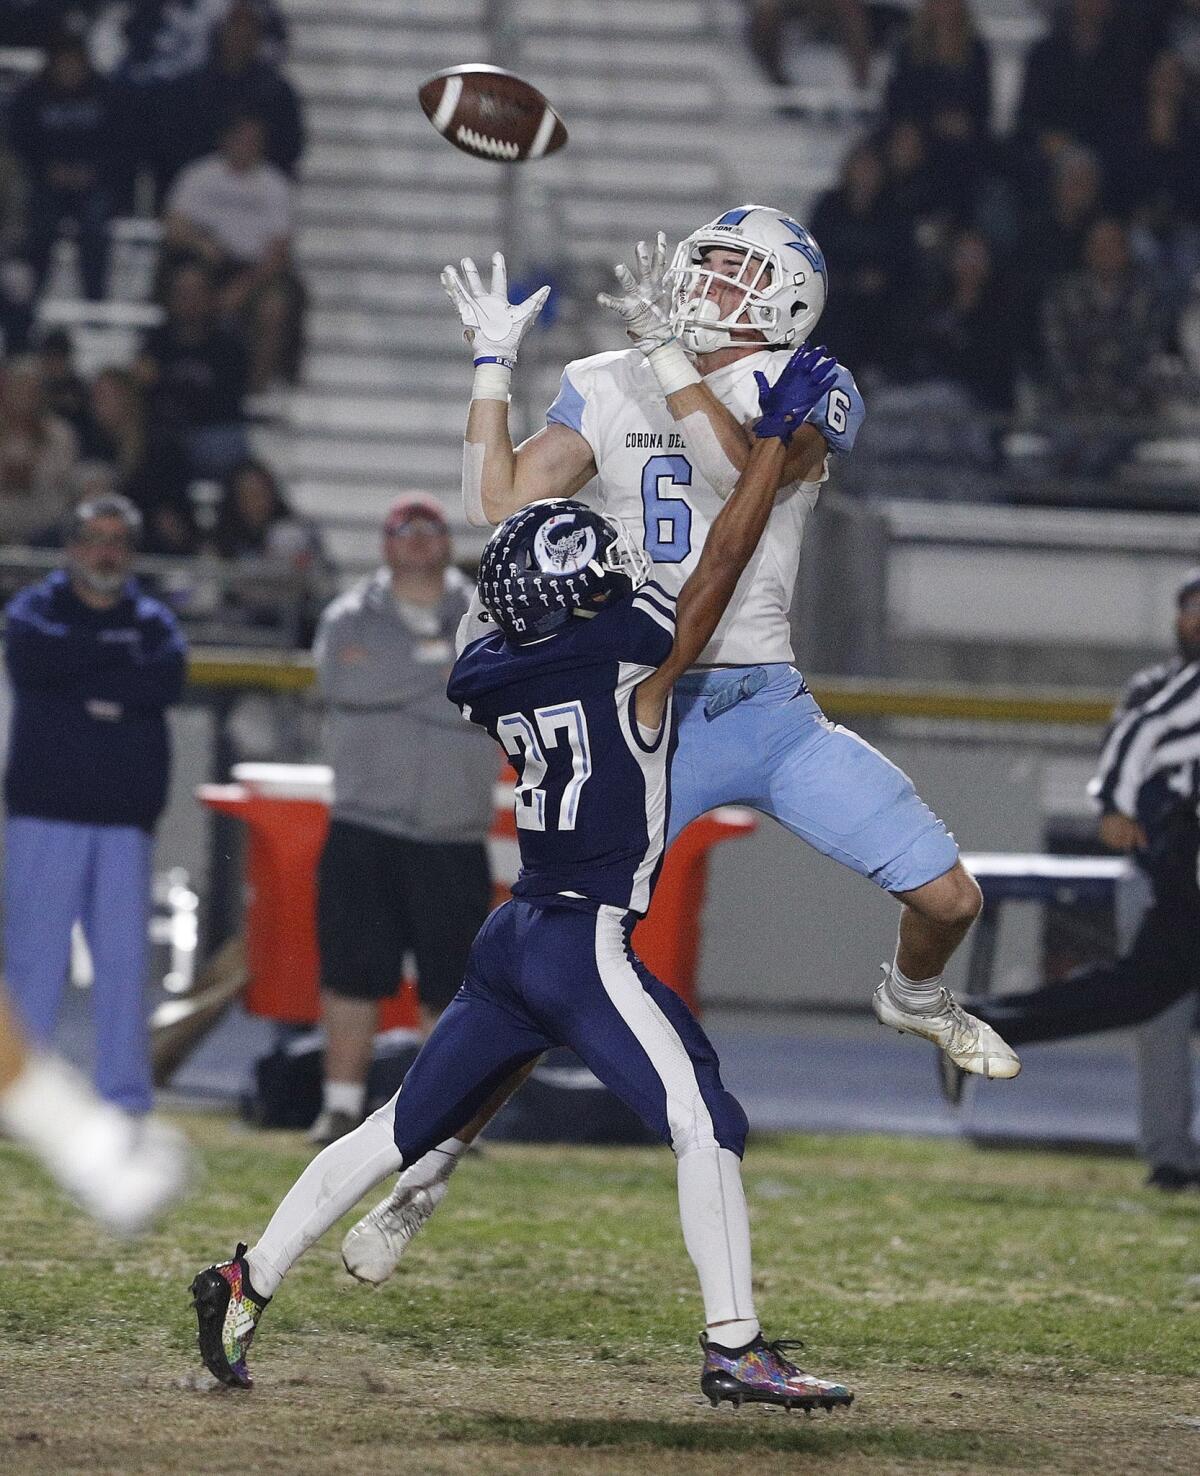 Corona del Mar High wide receiver John Humphreys jumps over Camarillo's Izaiah Lazaro to make a catch in the second quarter of the CIF Southern Section Division 4 semifinal playoff road game on Nov. 16, 2018.